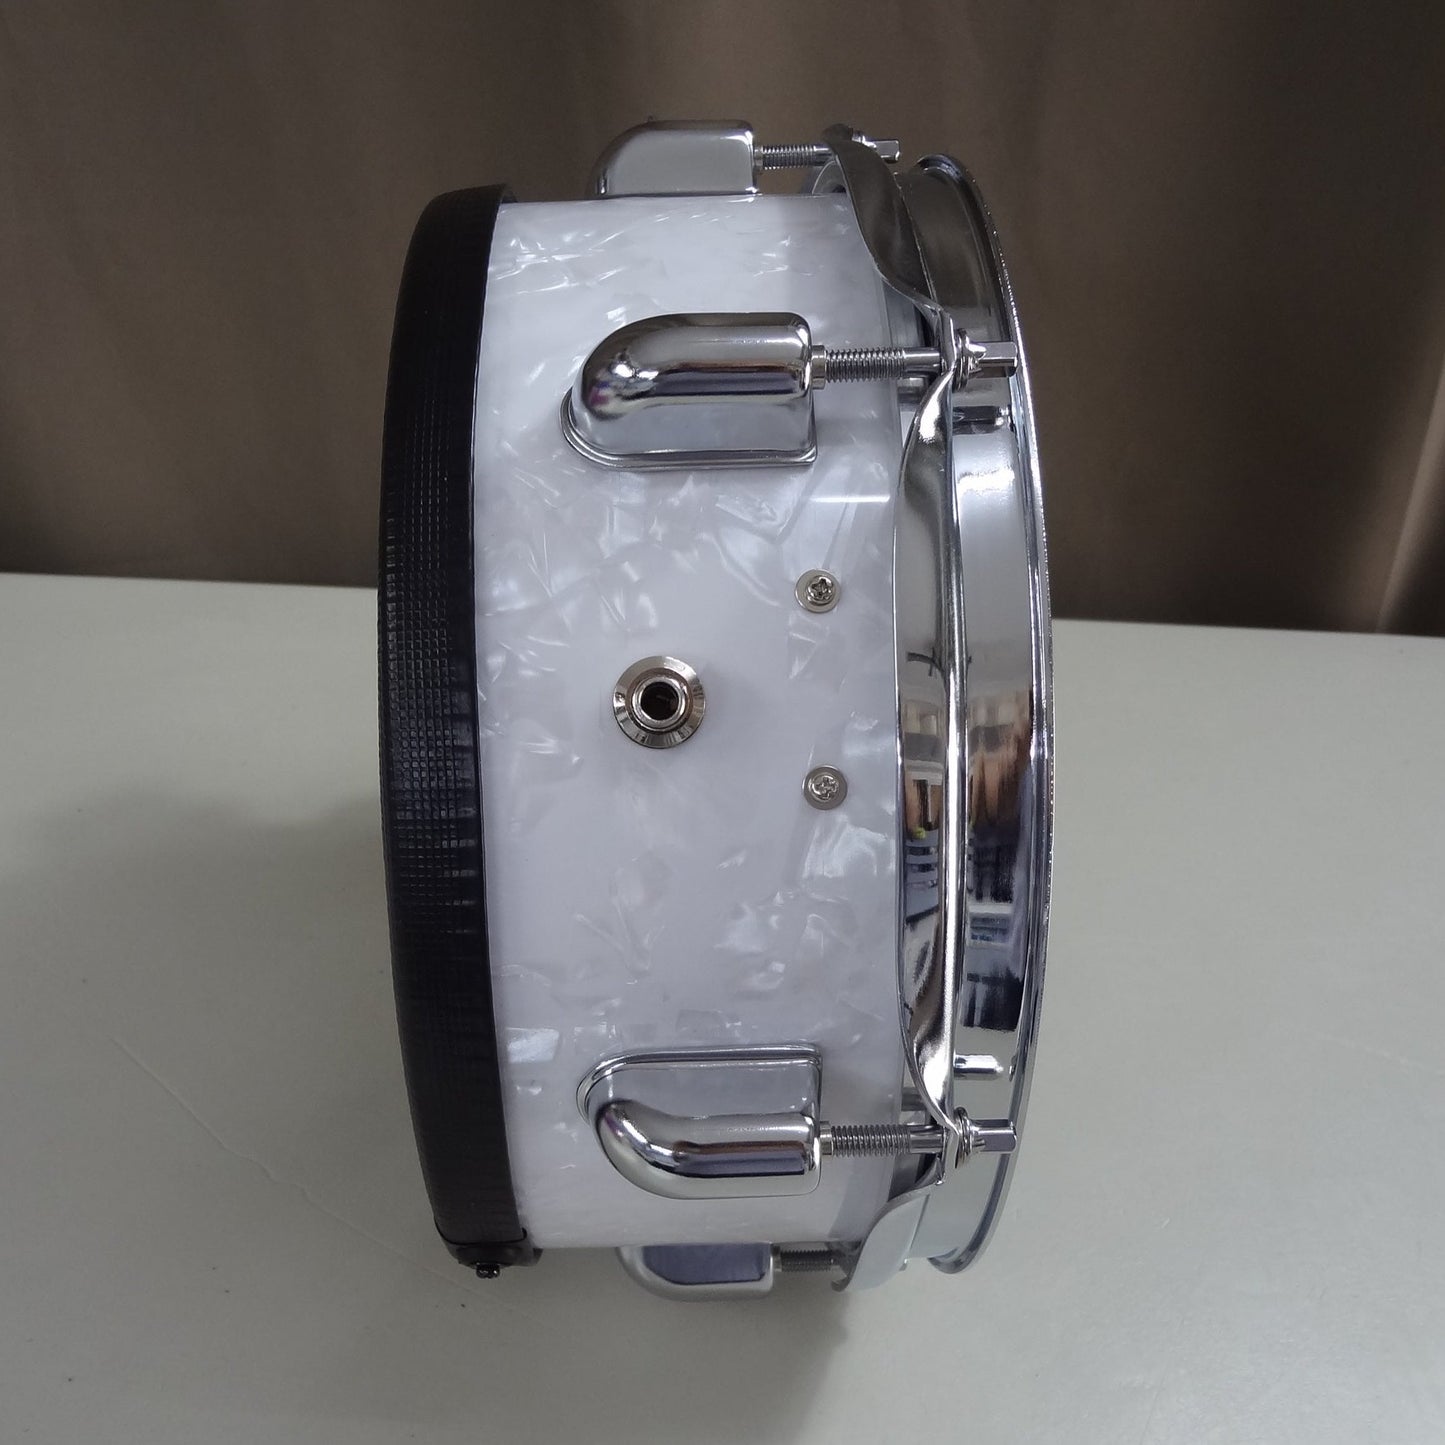 New 10 Inch Custom Electronic Snare Drum - White Pearl - Tin Chrome Lugs.